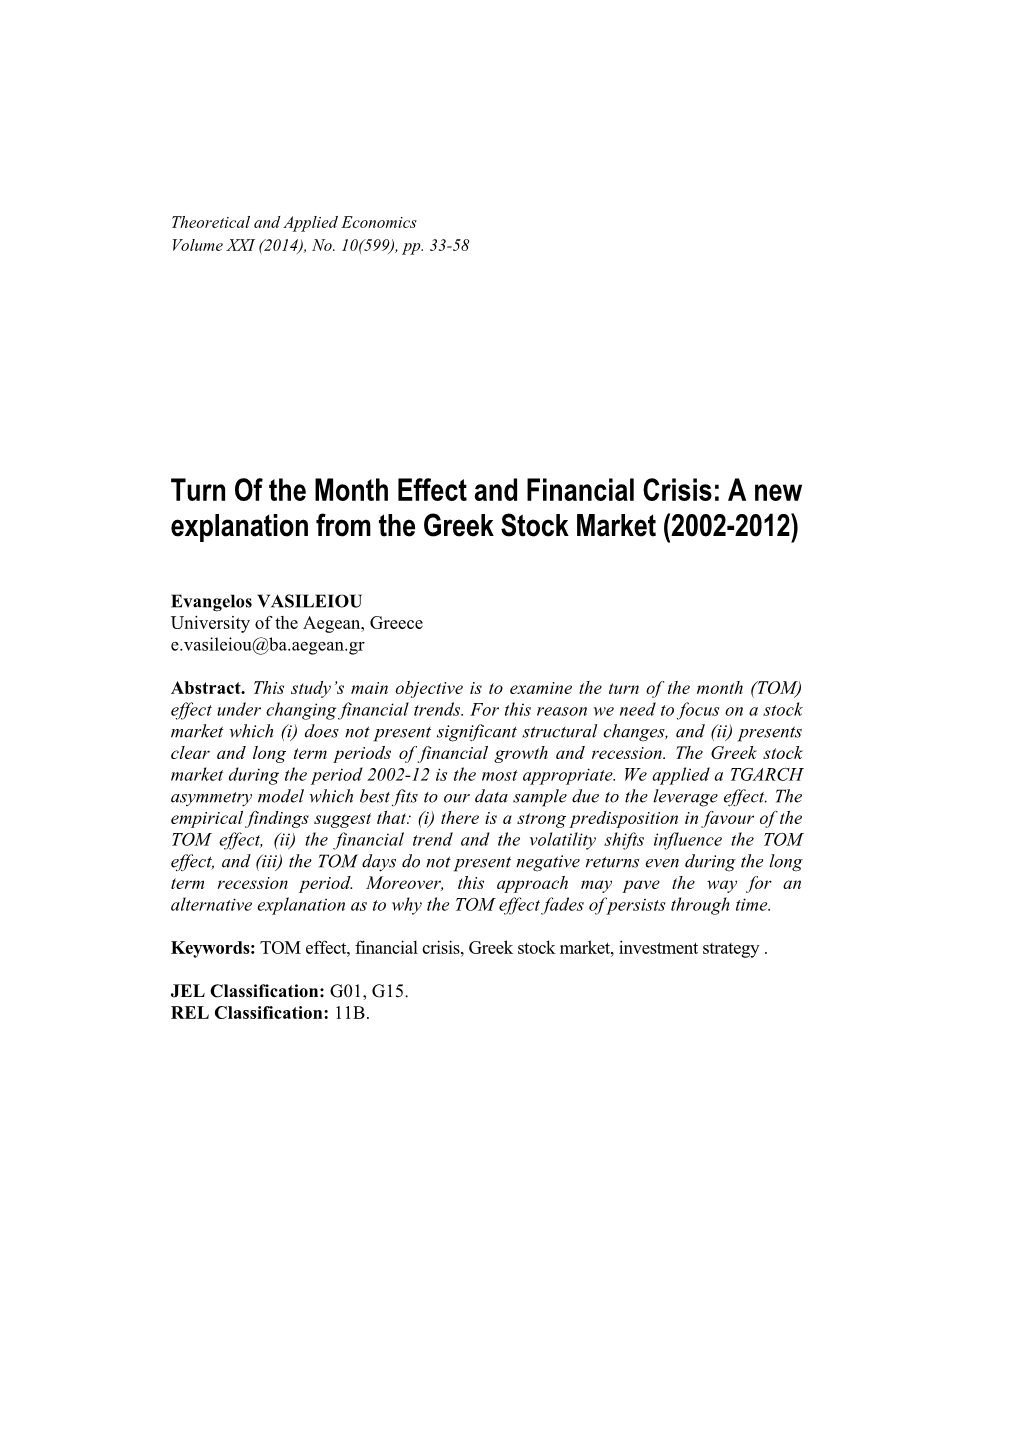 Turn of the Month Effect and Financial Crisis: a New Explanation from the Greek Stock Market (2002-2012)